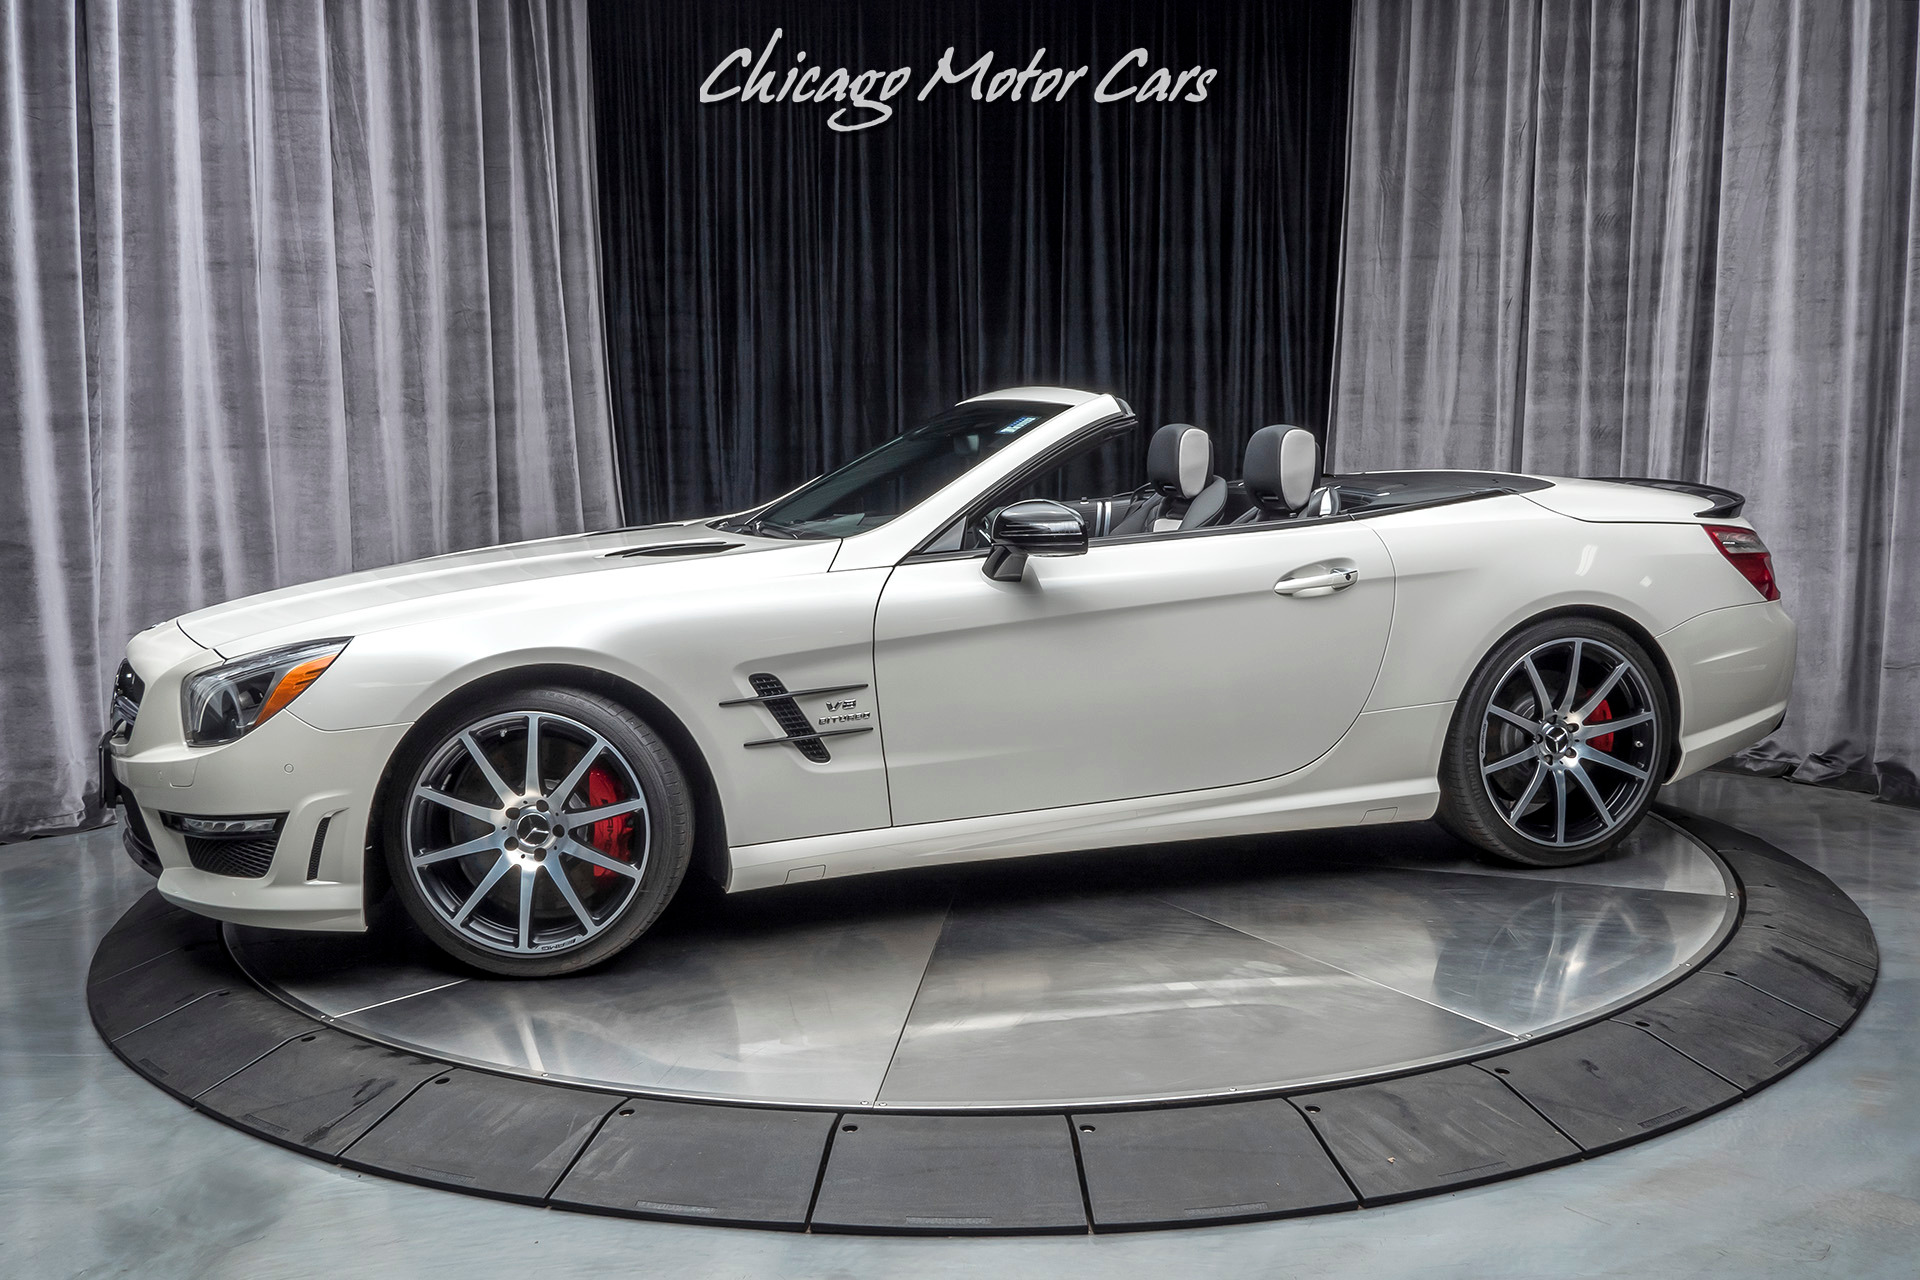 Used 2016 Mercedes-Benz SL63 AMG Convertible MSRP $165,020+ AMG HIGH  CONTRAST STYLING! FULL Radar System! For Sale (Special Pricing) | Chicago  Motor Cars Stock #16627